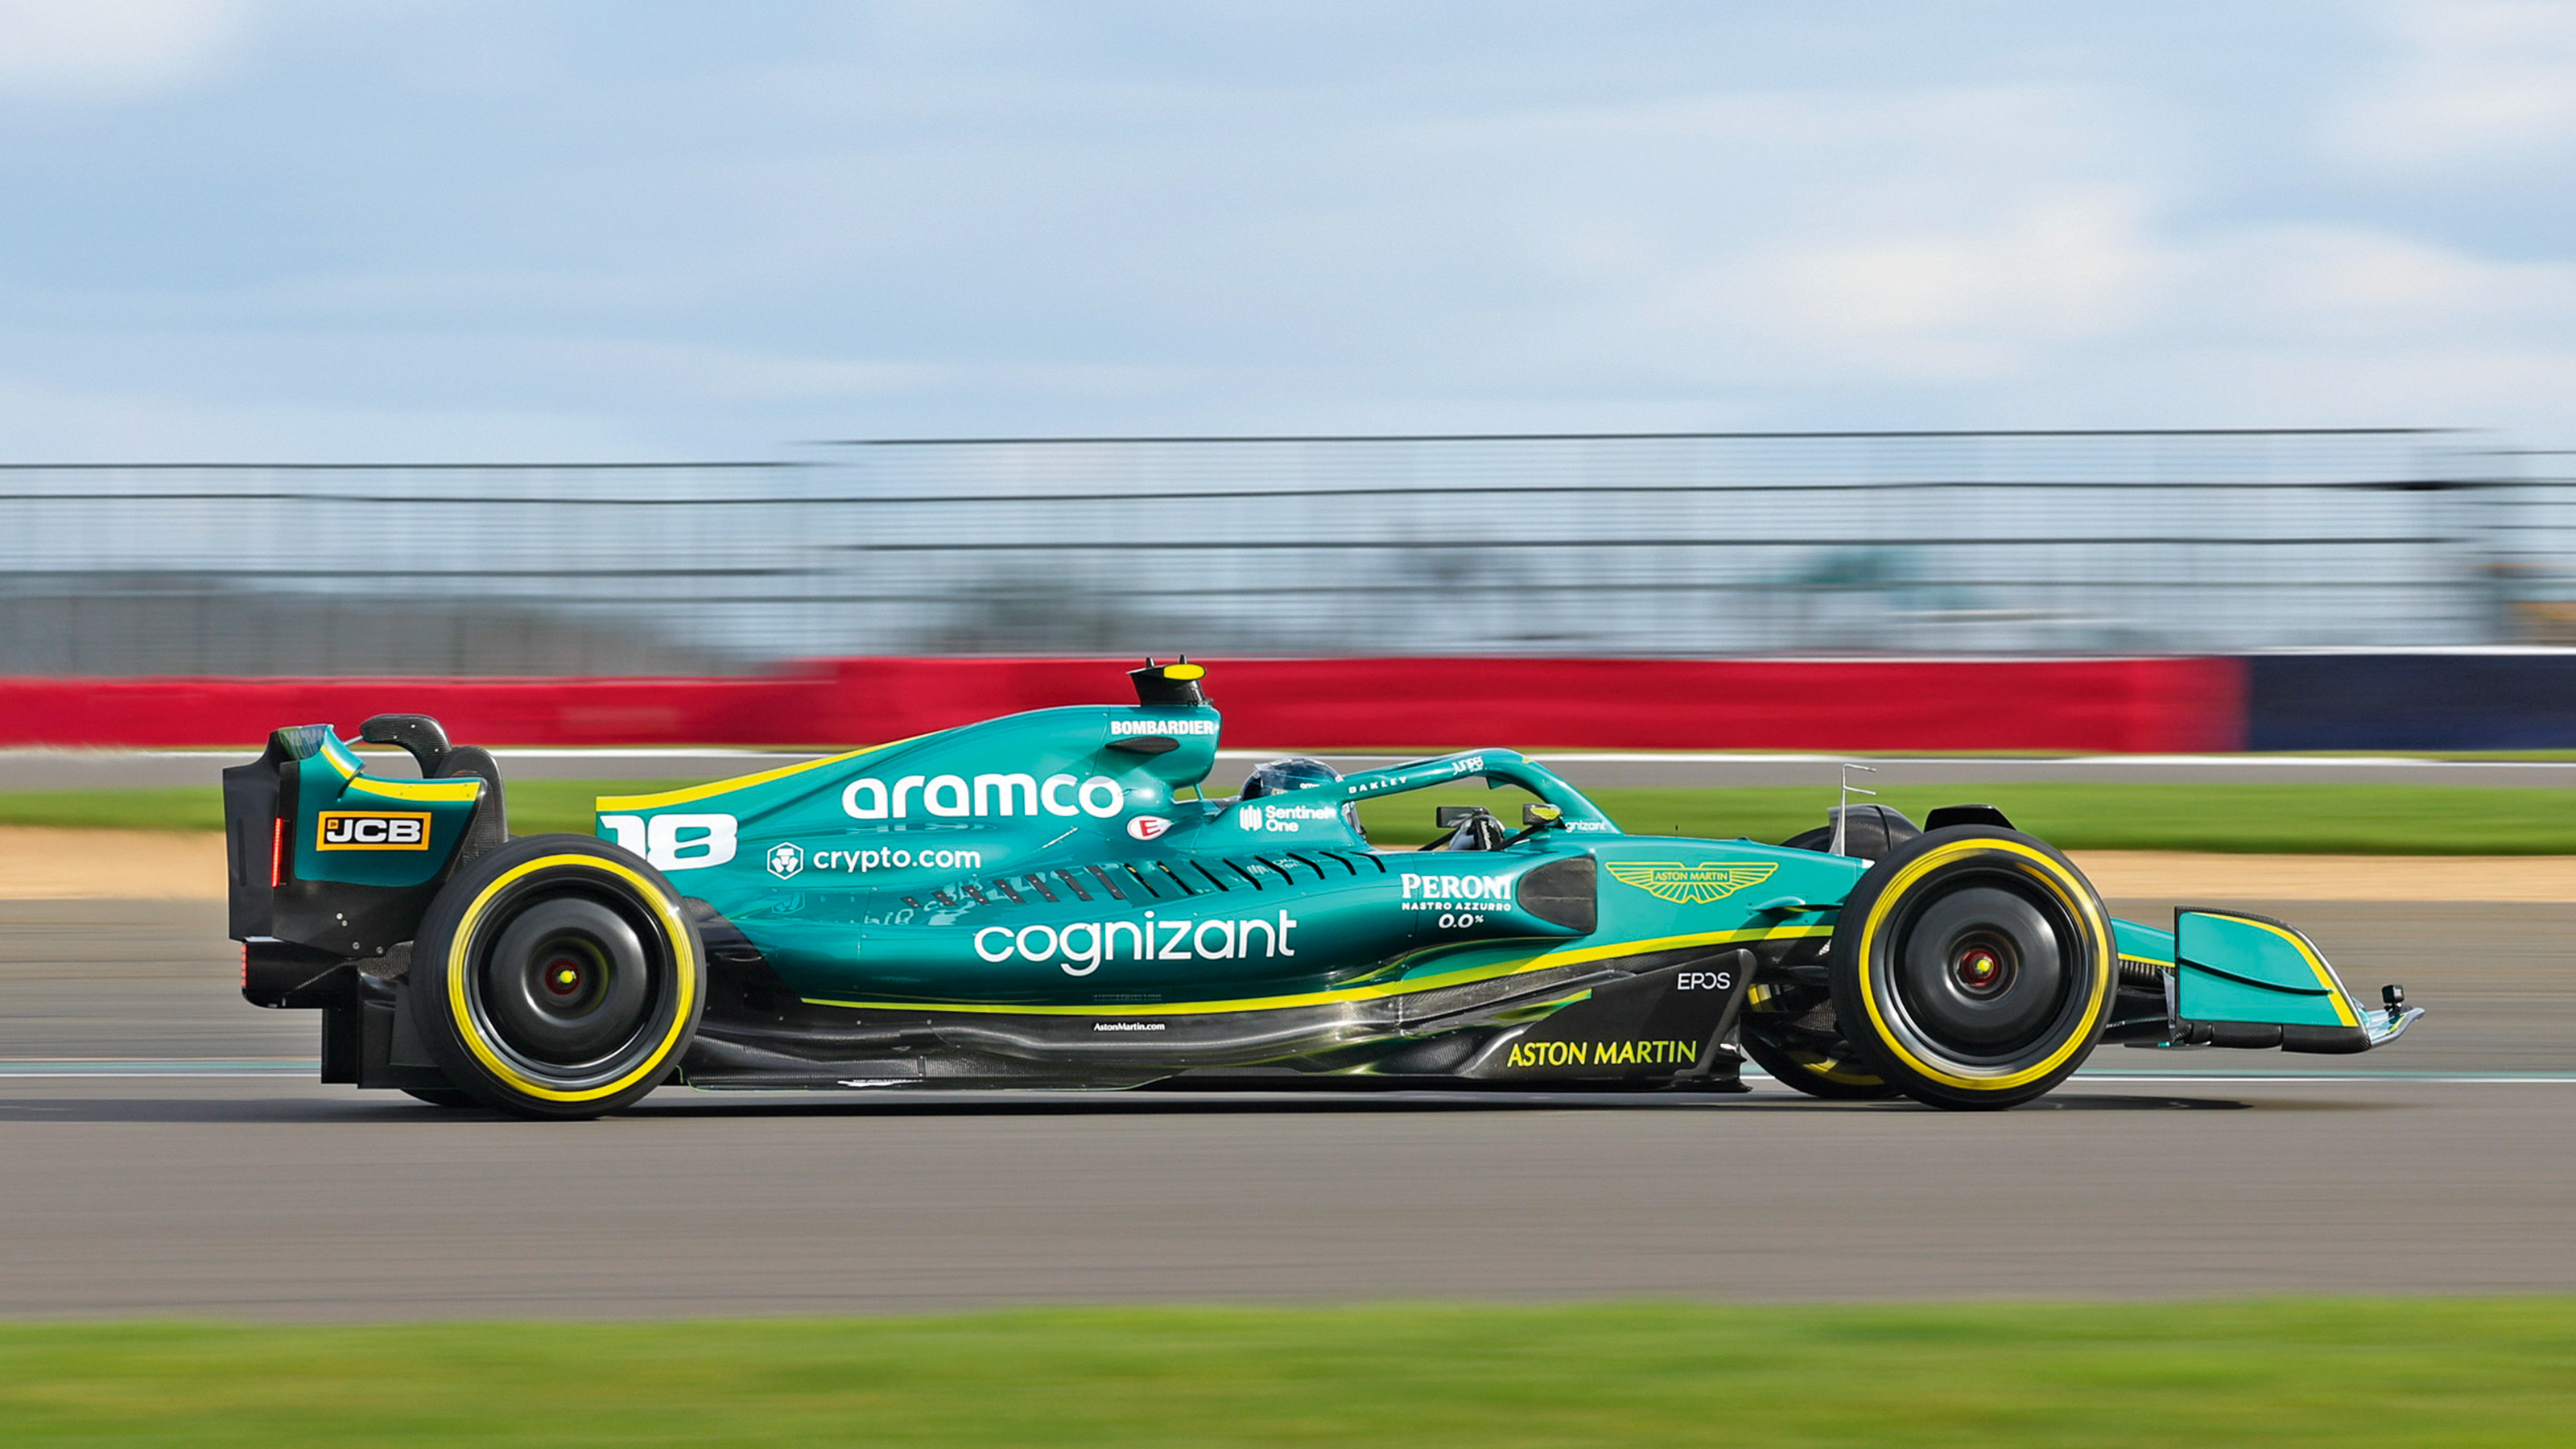 How Aston Martin Is Shaking Up the F1 Power Structure